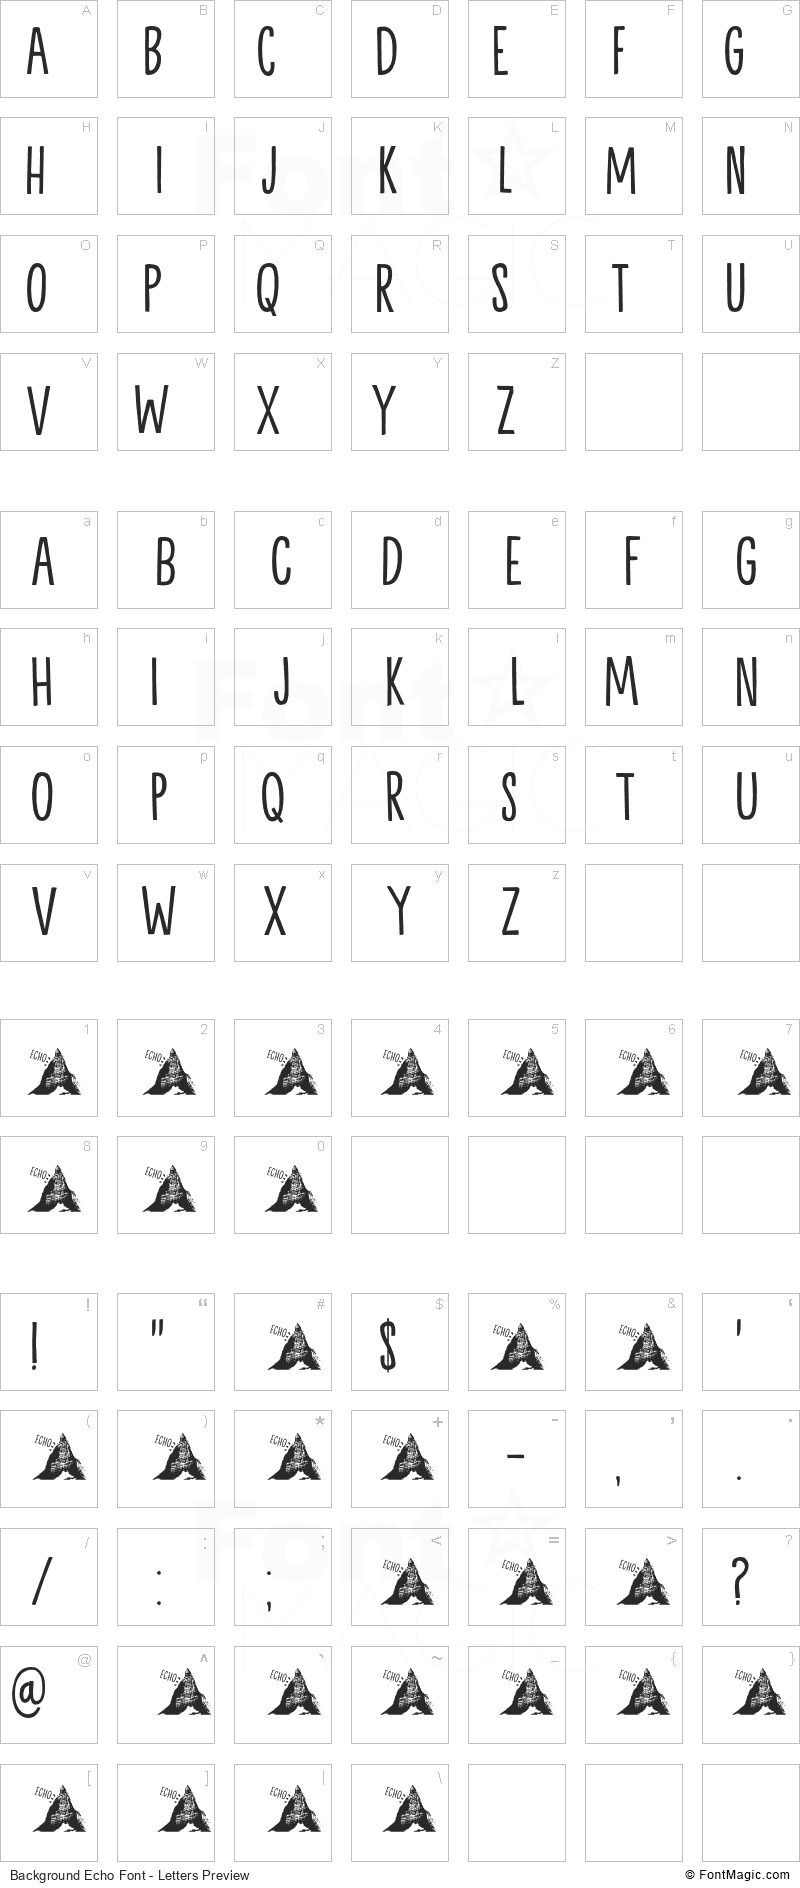 Background Echo Font - All Latters Preview Chart